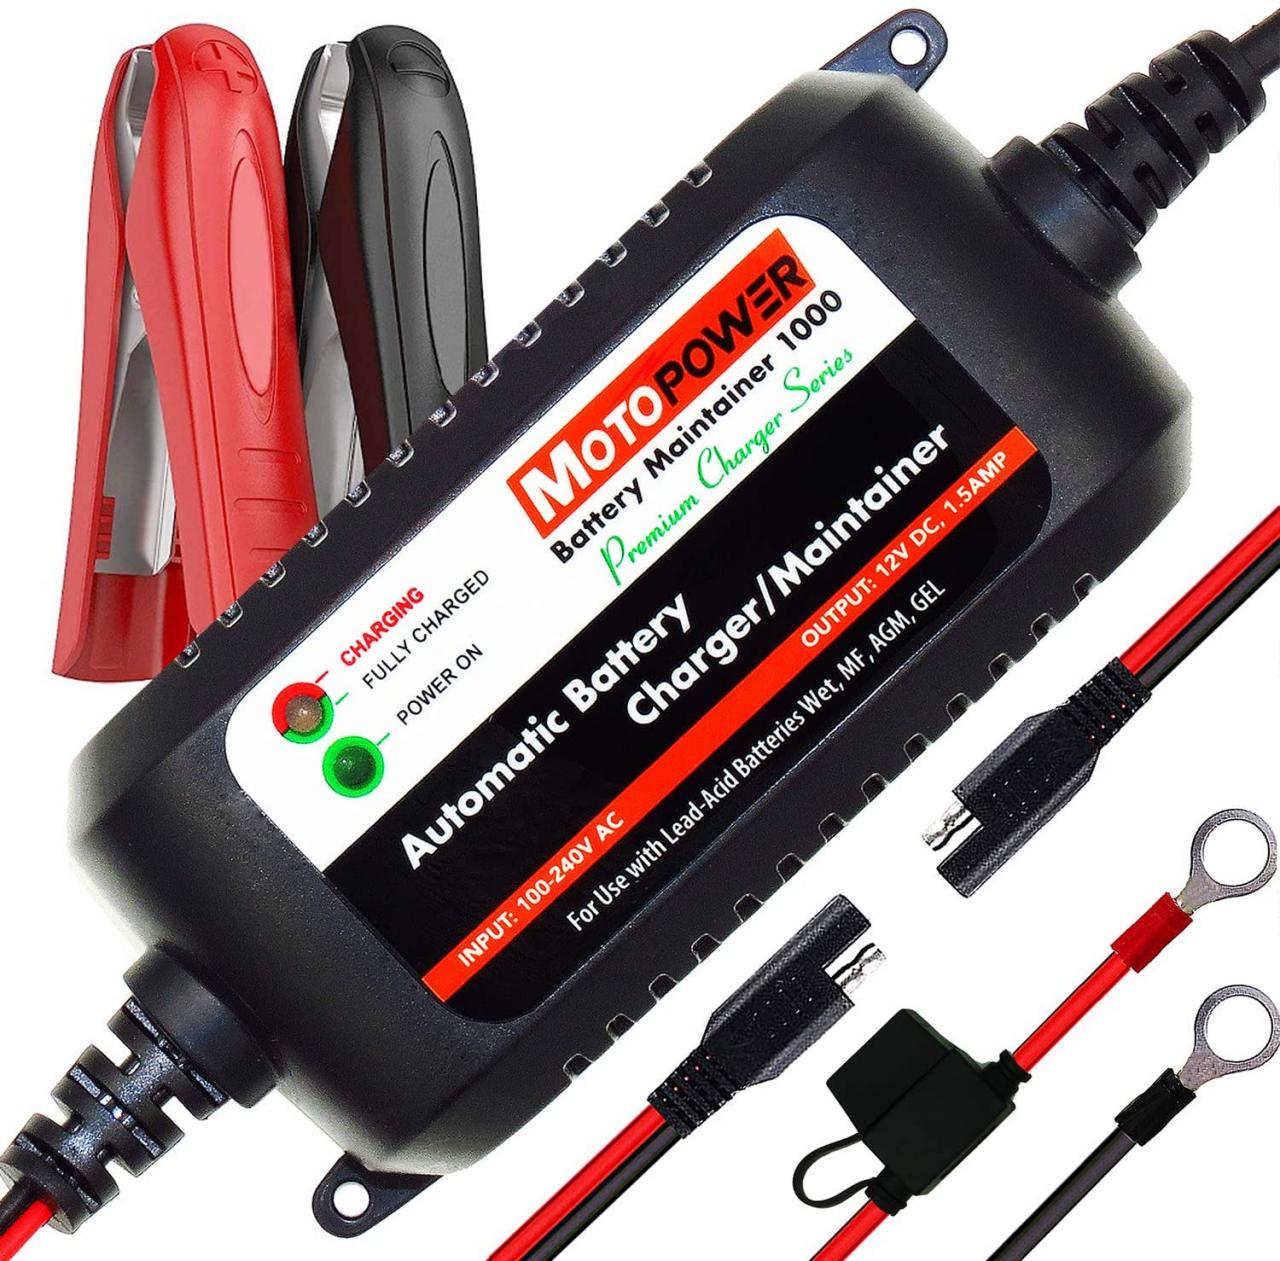 Buy MOTOPOWER MP00206A 12V 1.5Amp Automatic Battery Charger, Battery  Maintainer for Cars, Motorcycles, ATVs, RVs, Powersports, Boat and More.  Smart, Compact and Eco Friendly Online in Vietnam. B01DYE5EBI